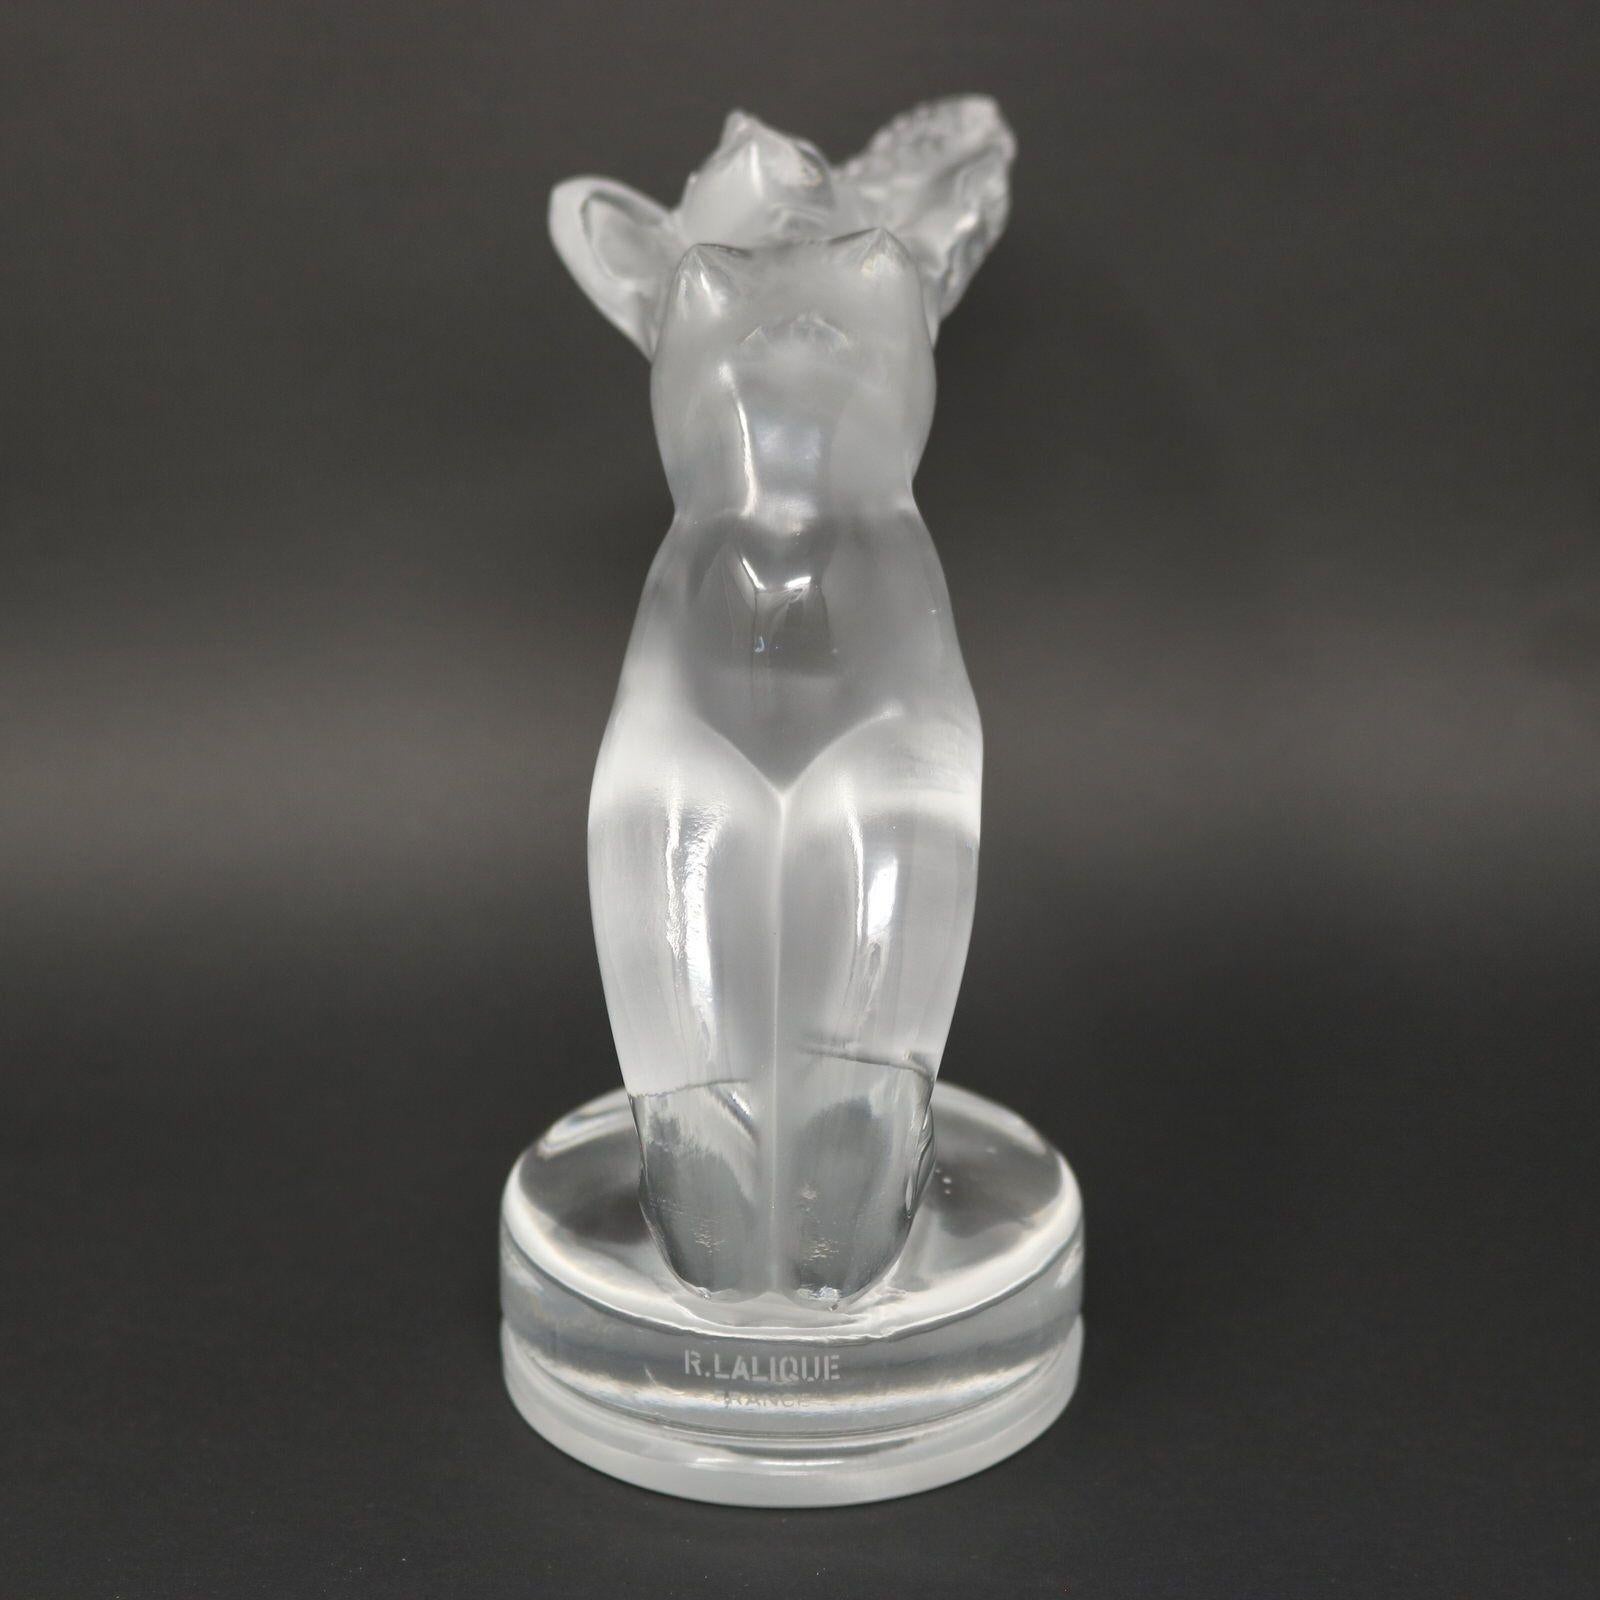 Rene Lalique clear and frosted glass 'Chrysis' car mascot (radiator cap). Features a naked female figure, kneeling, with her head thrown back. In ancient Greece, Chrysis was the priestess of Hera at the ancient Greek sanctuary of Hera, Argos, during